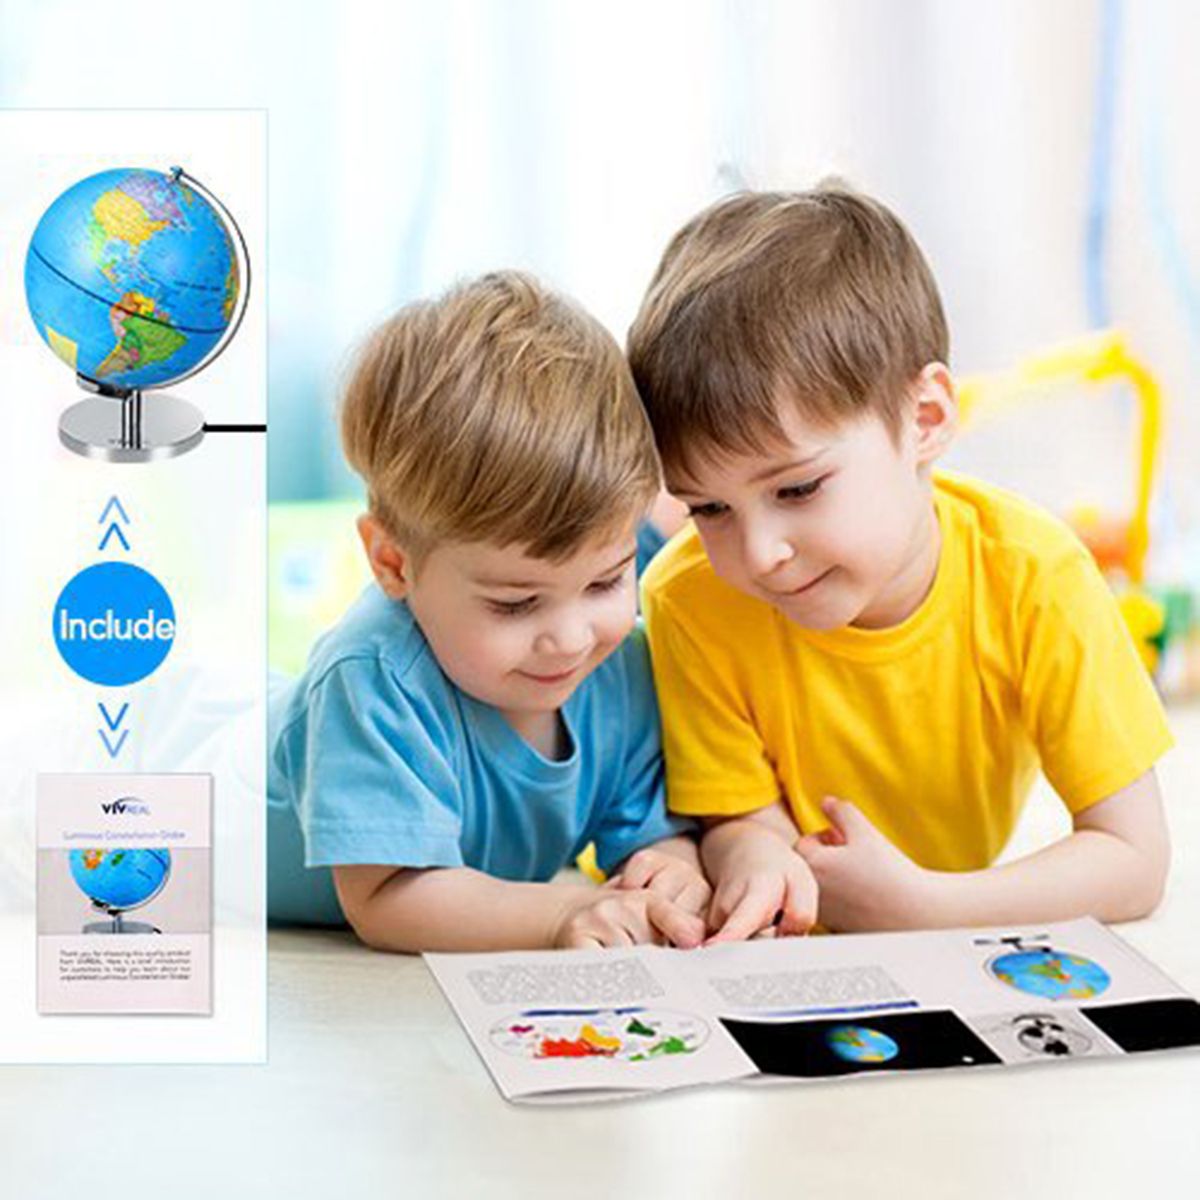 9-inch-LED-World-Globe-Earth-Tellurion-Rotating-Stand-Geography-for-Education-1635466